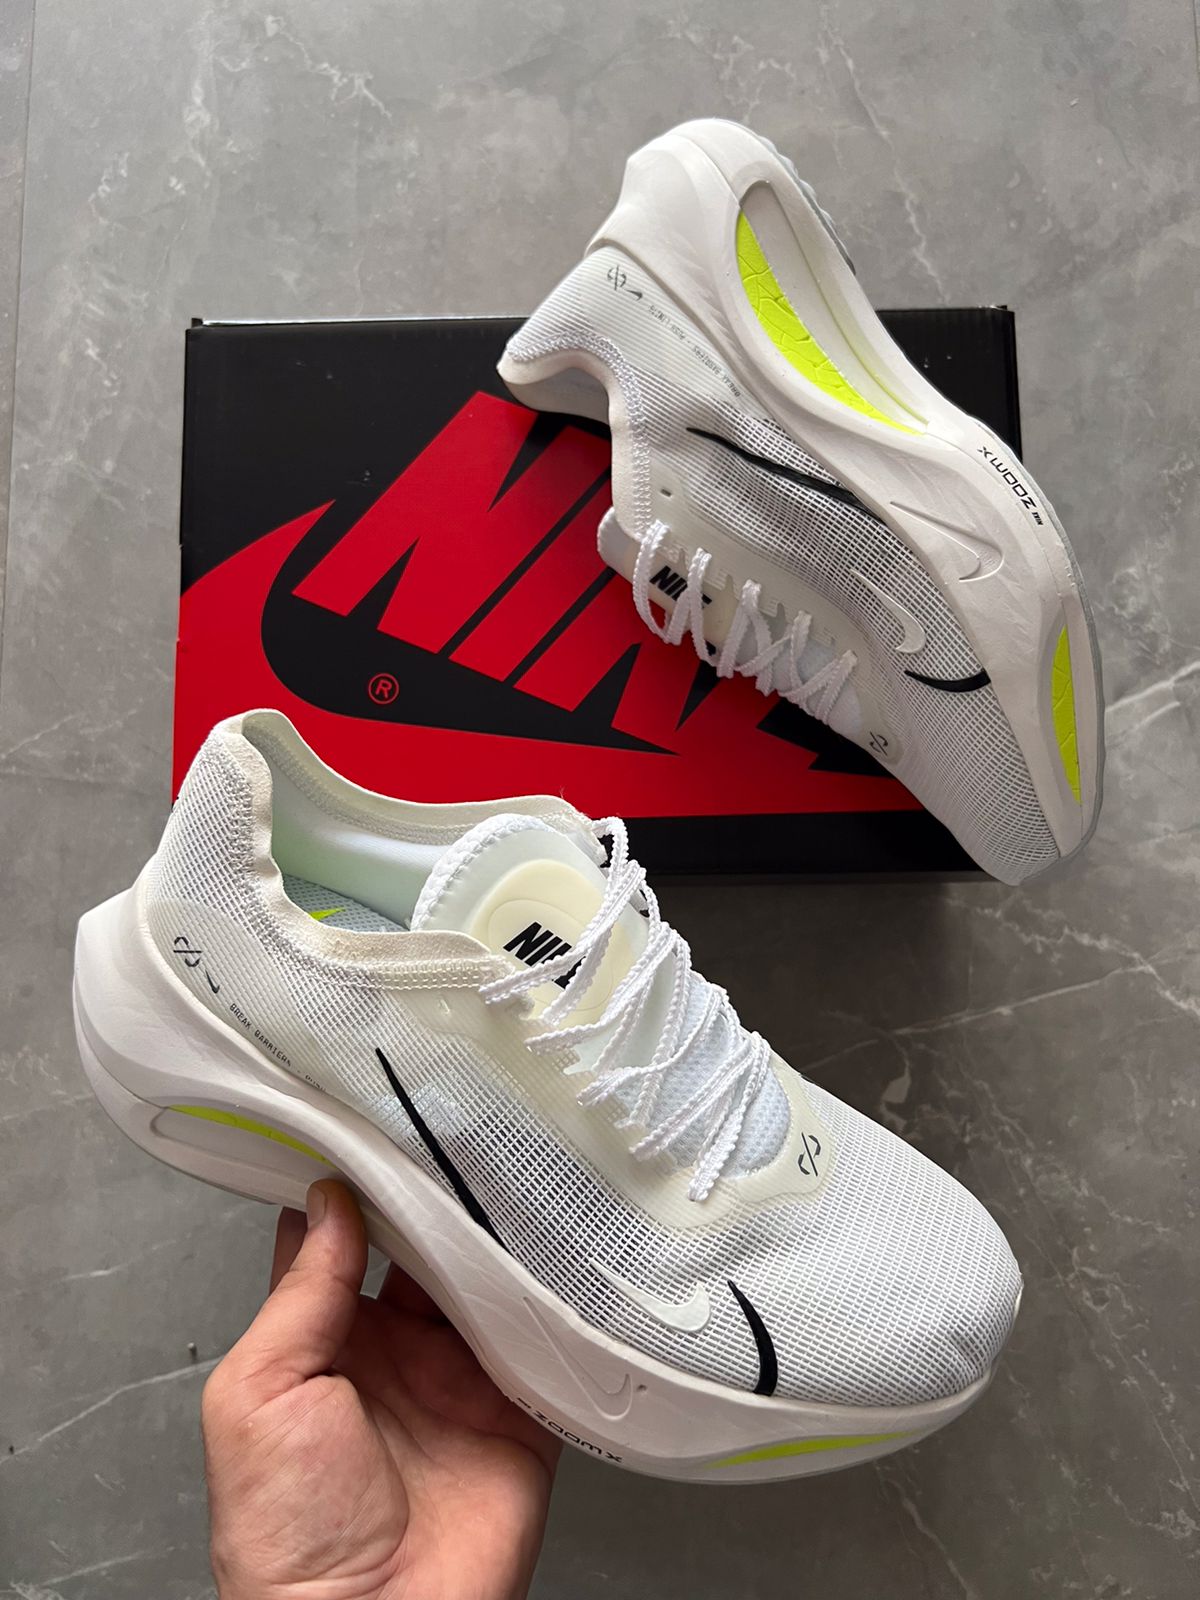 Imported Sneakers Zoom 39 Pro 2 Colors